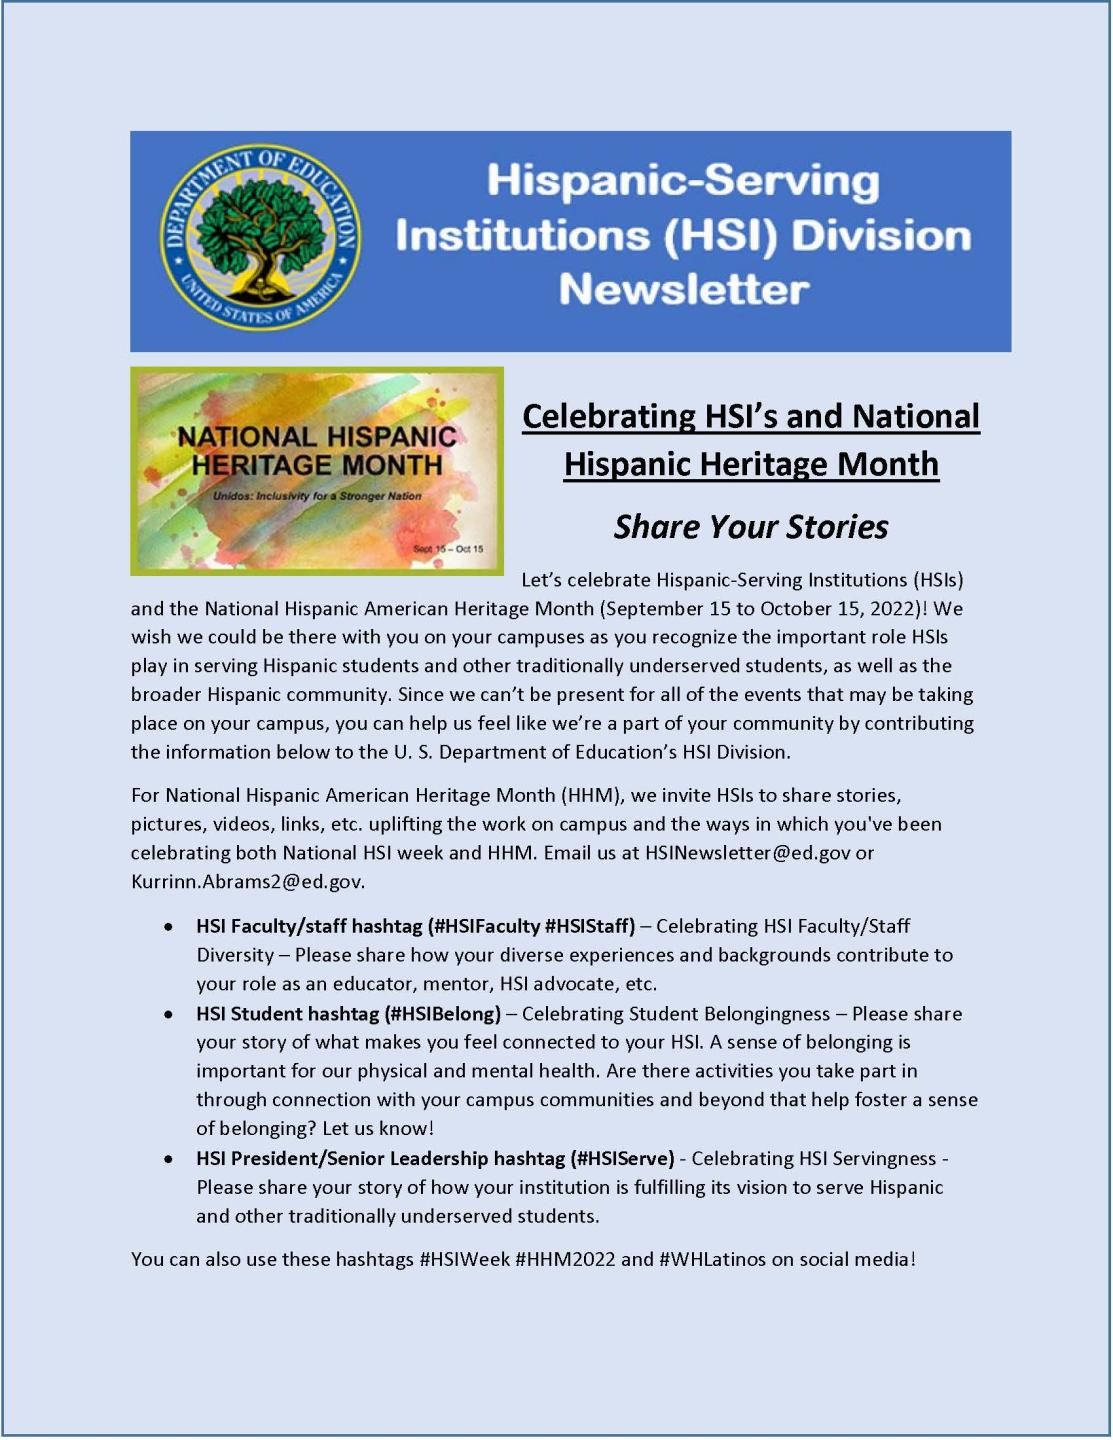 HSI Division Stories